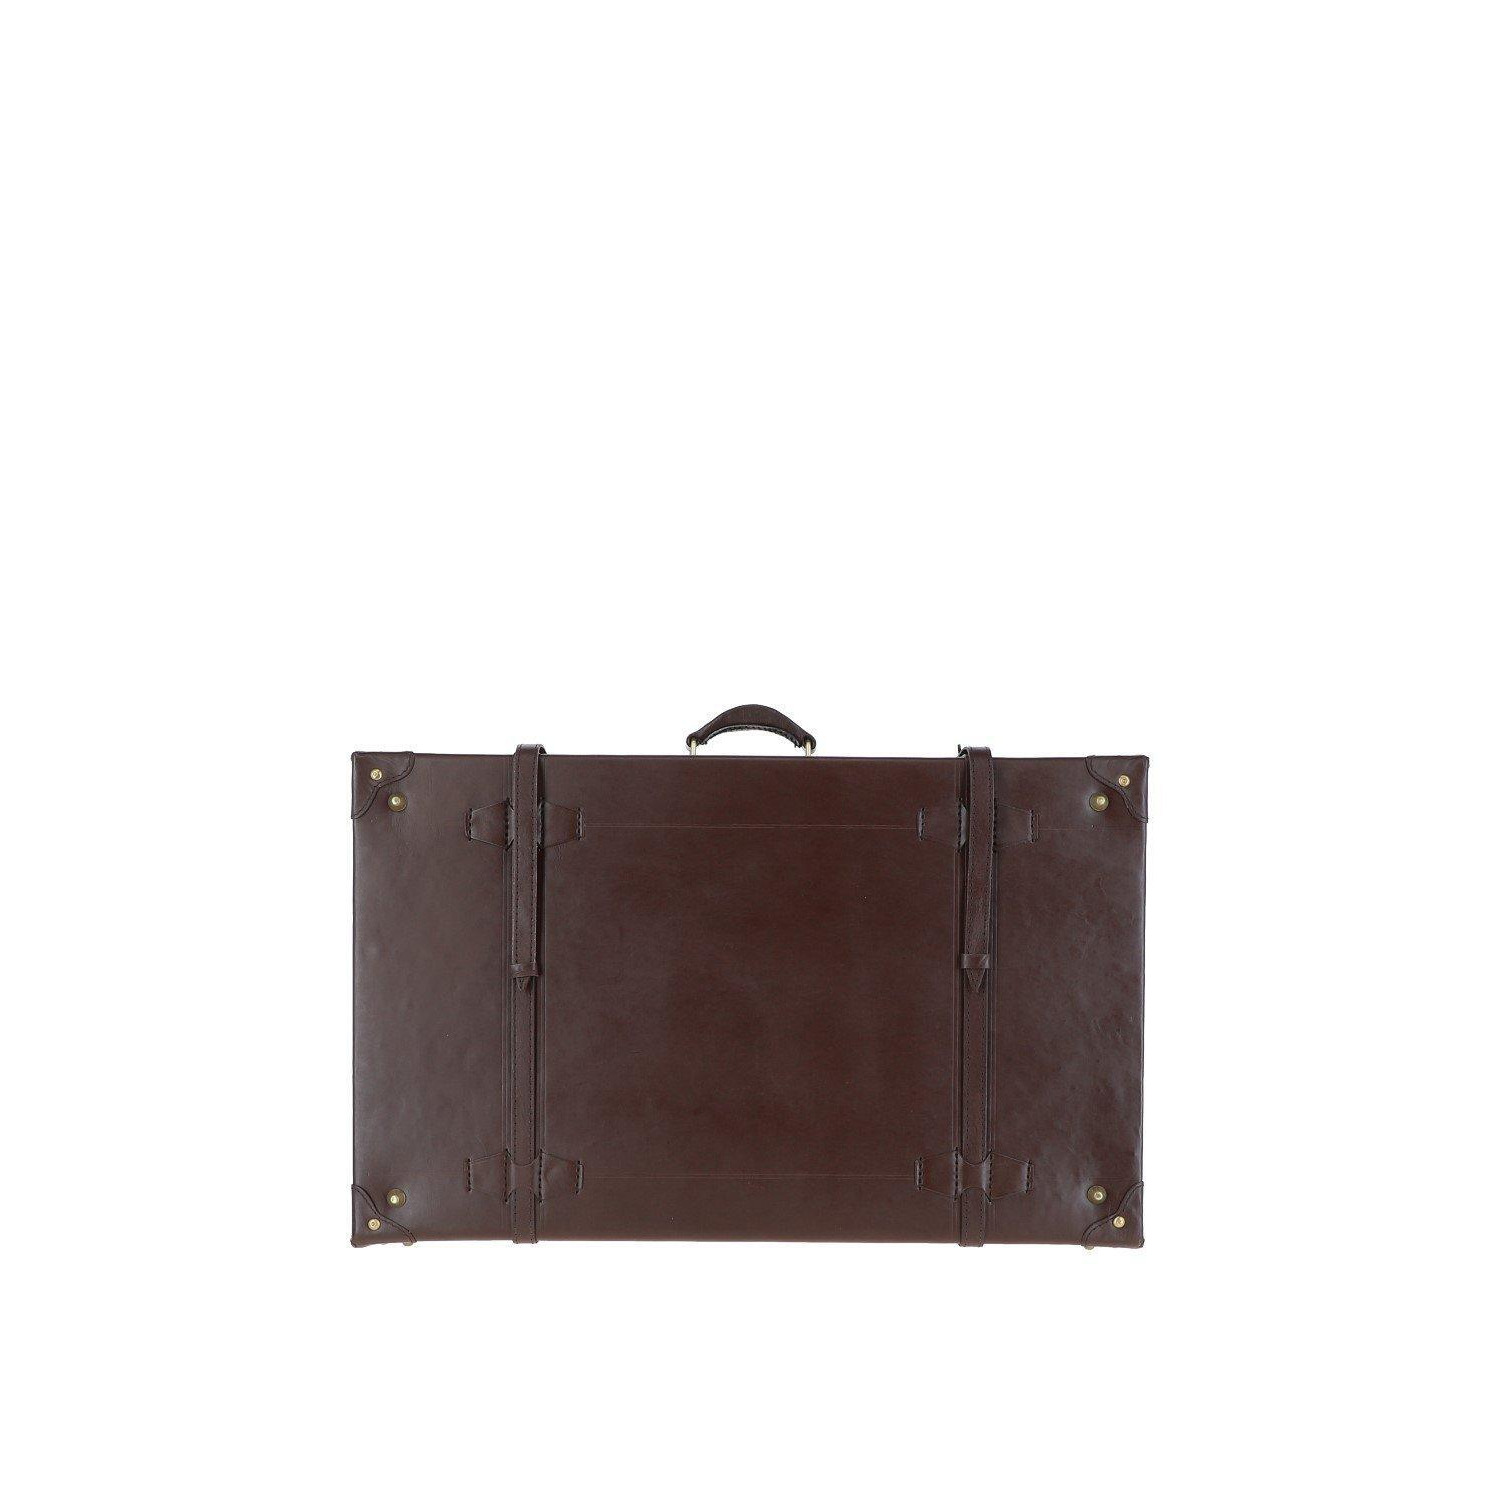 'Andare' Vintage Large Leather Trunk - image 1